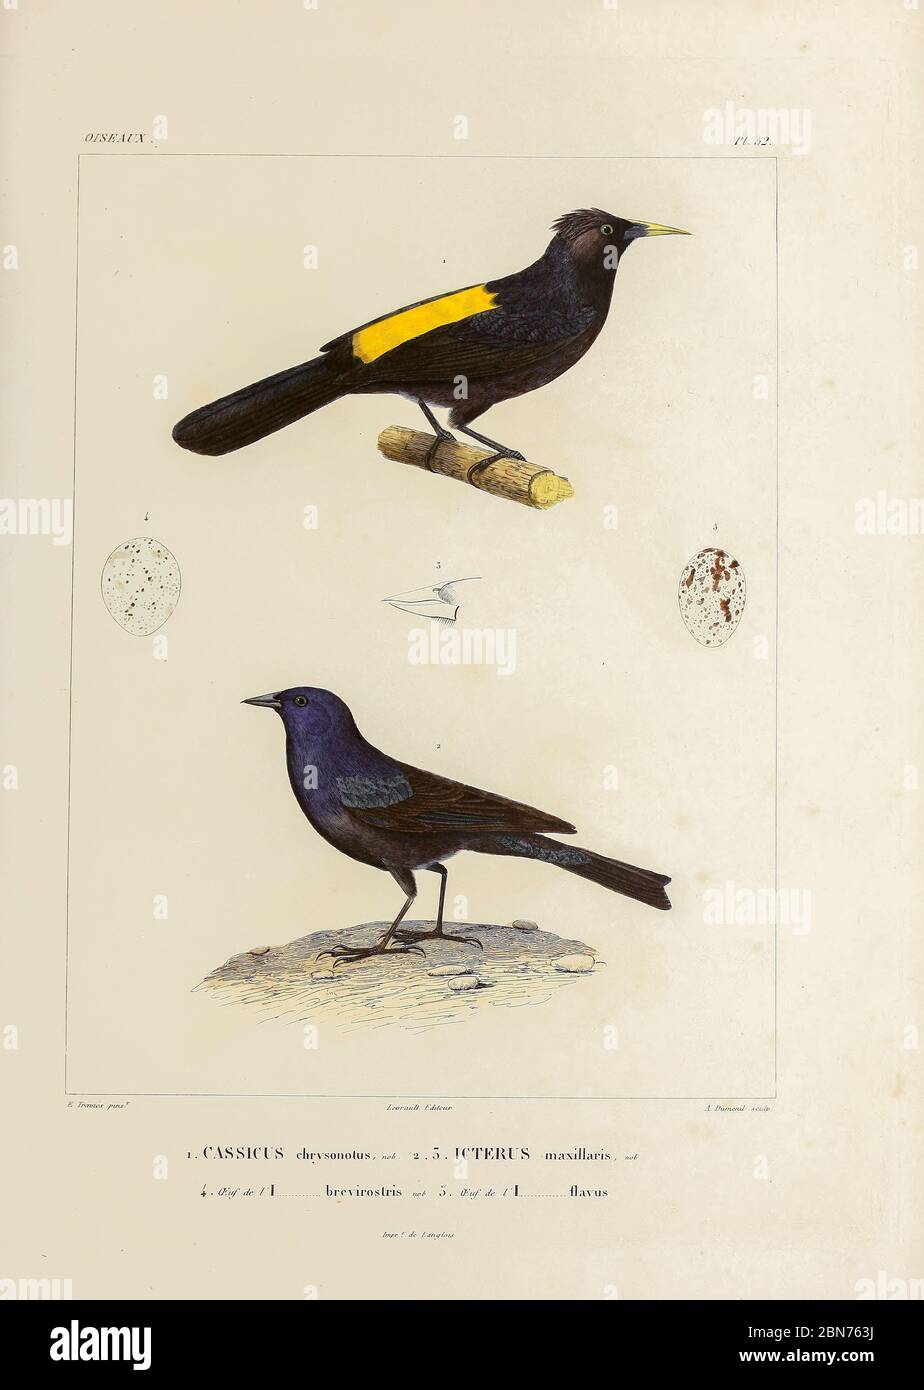 hand coloured sketch Top: mountain cacique (Cacicus chrysonotus)  [Here as Cassicus chrysonotus]) Bottom: shiny cowbird (Molothrus bonariensis) [Here as icterus maxillaris]) From the book 'Voyage dans l'Amérique Méridionale' [Journey to South America: (Brazil, the eastern republic of Uruguay, the Argentine Republic, Patagonia, the republic of Chile, the republic of Bolivia, the republic of Peru), executed during the years 1826 - 1833] 4th volume Part 3 By: Orbigny, Alcide Dessalines d', d'Orbigny, 1802-1857; Montagne, Jean François Camille, 1784-1866; Martius, Karl Friedrich Philipp von, 1794 Stock Photo